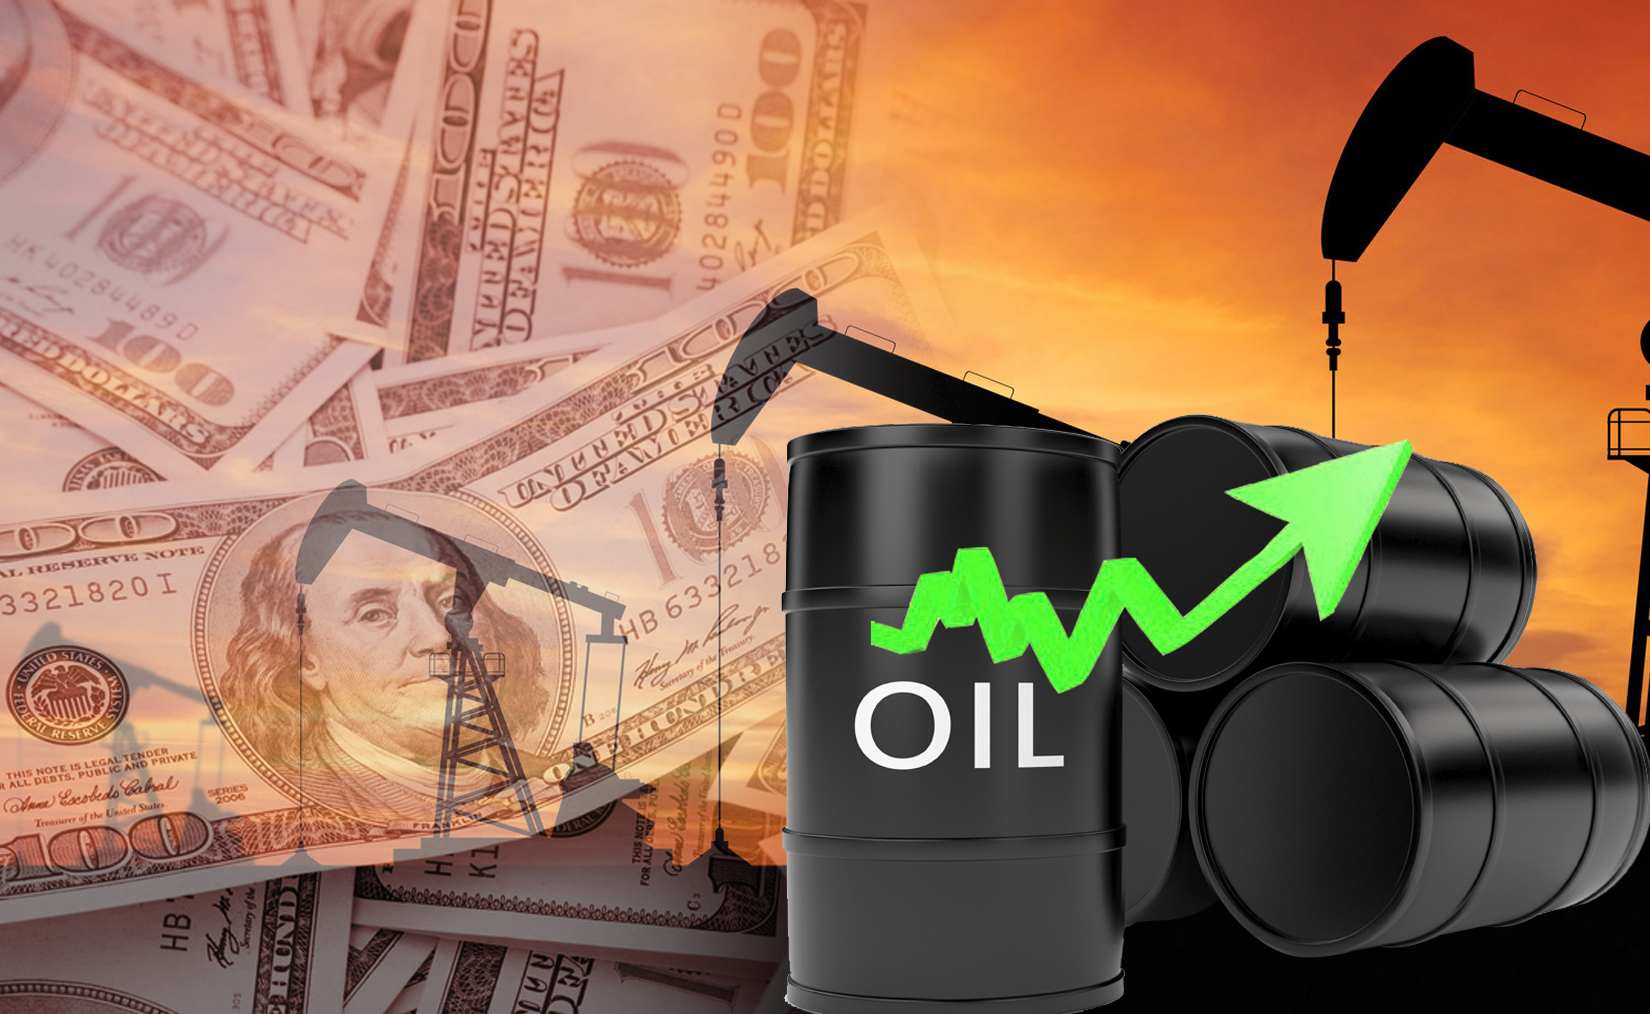 Kuwait oil price up 46 cents to USD 42.78 pb                                                                                                                                                                                                              